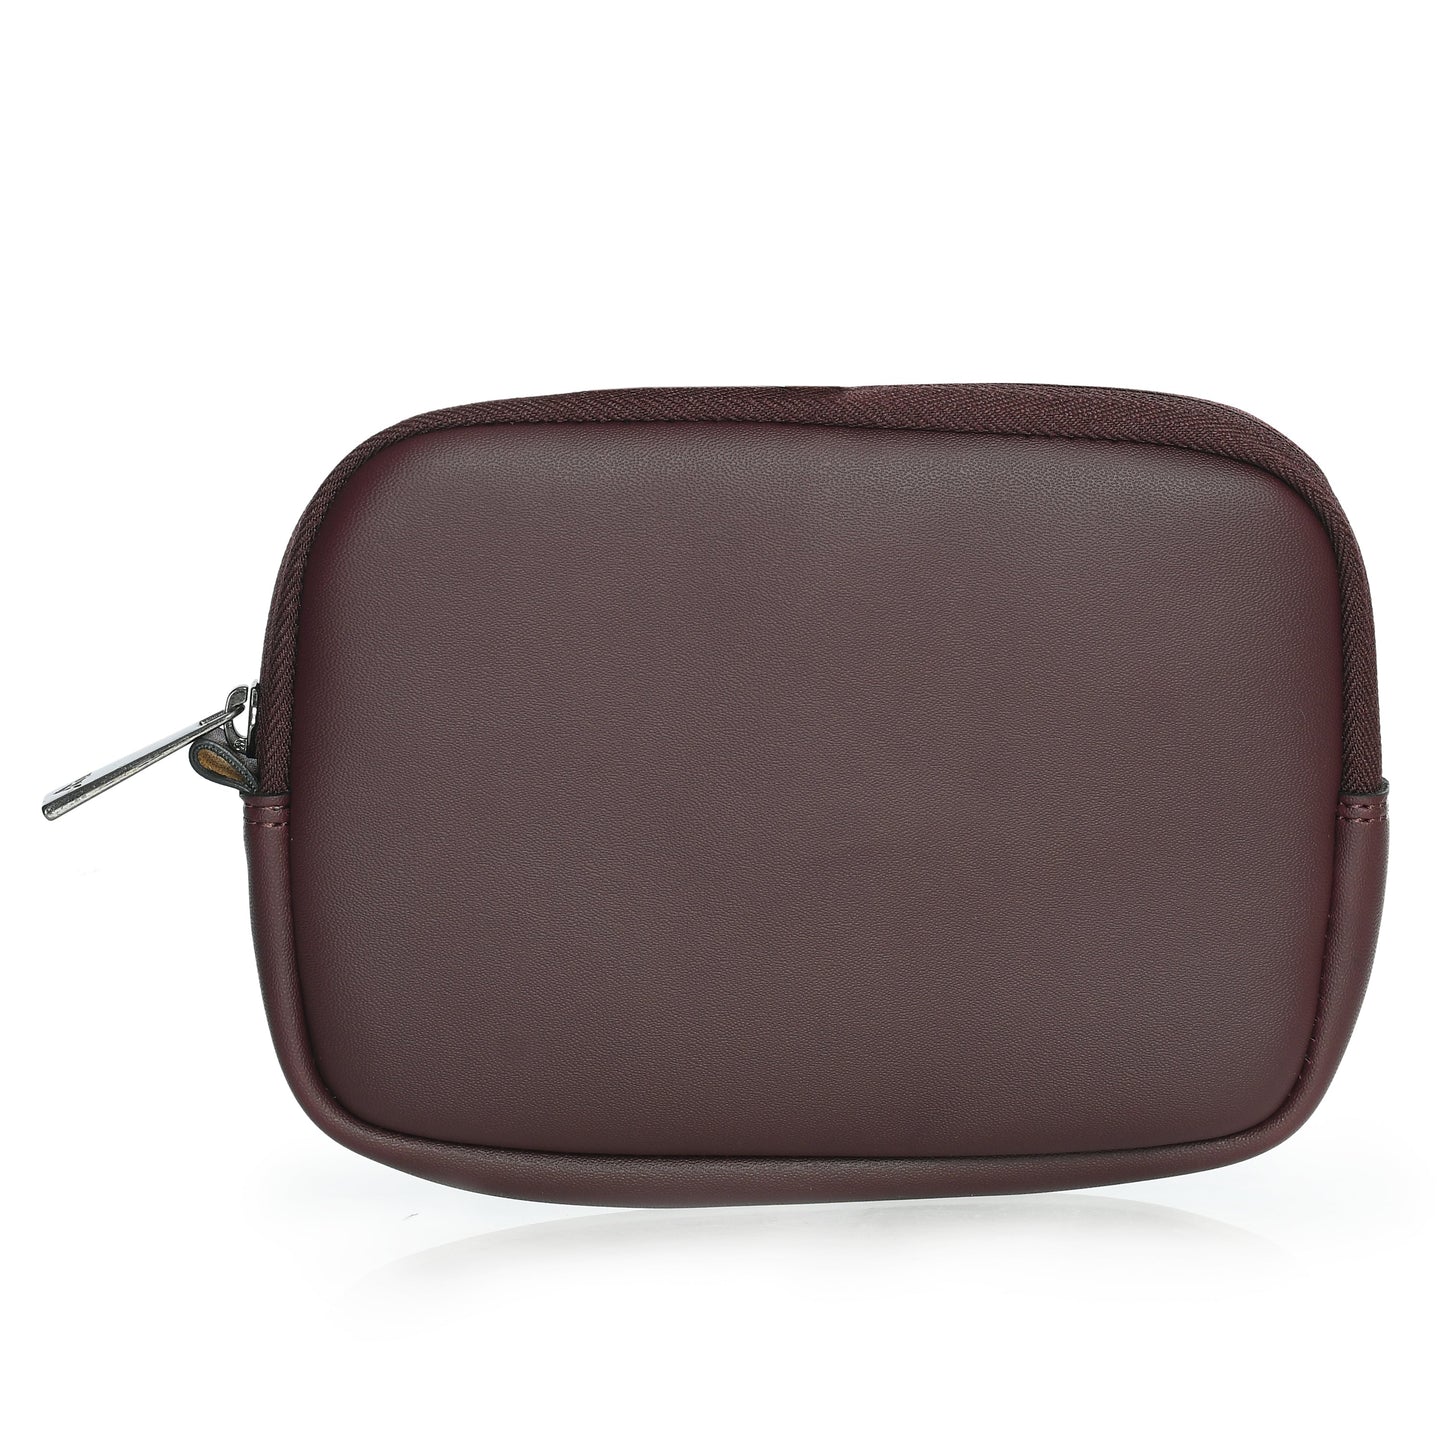 vaku-luxos®-da-italiano-refined-leather-sleeve-with-free-pouch-strap-highly-durable-compatilbe-for-macbook-14-cherry-red8905129019099